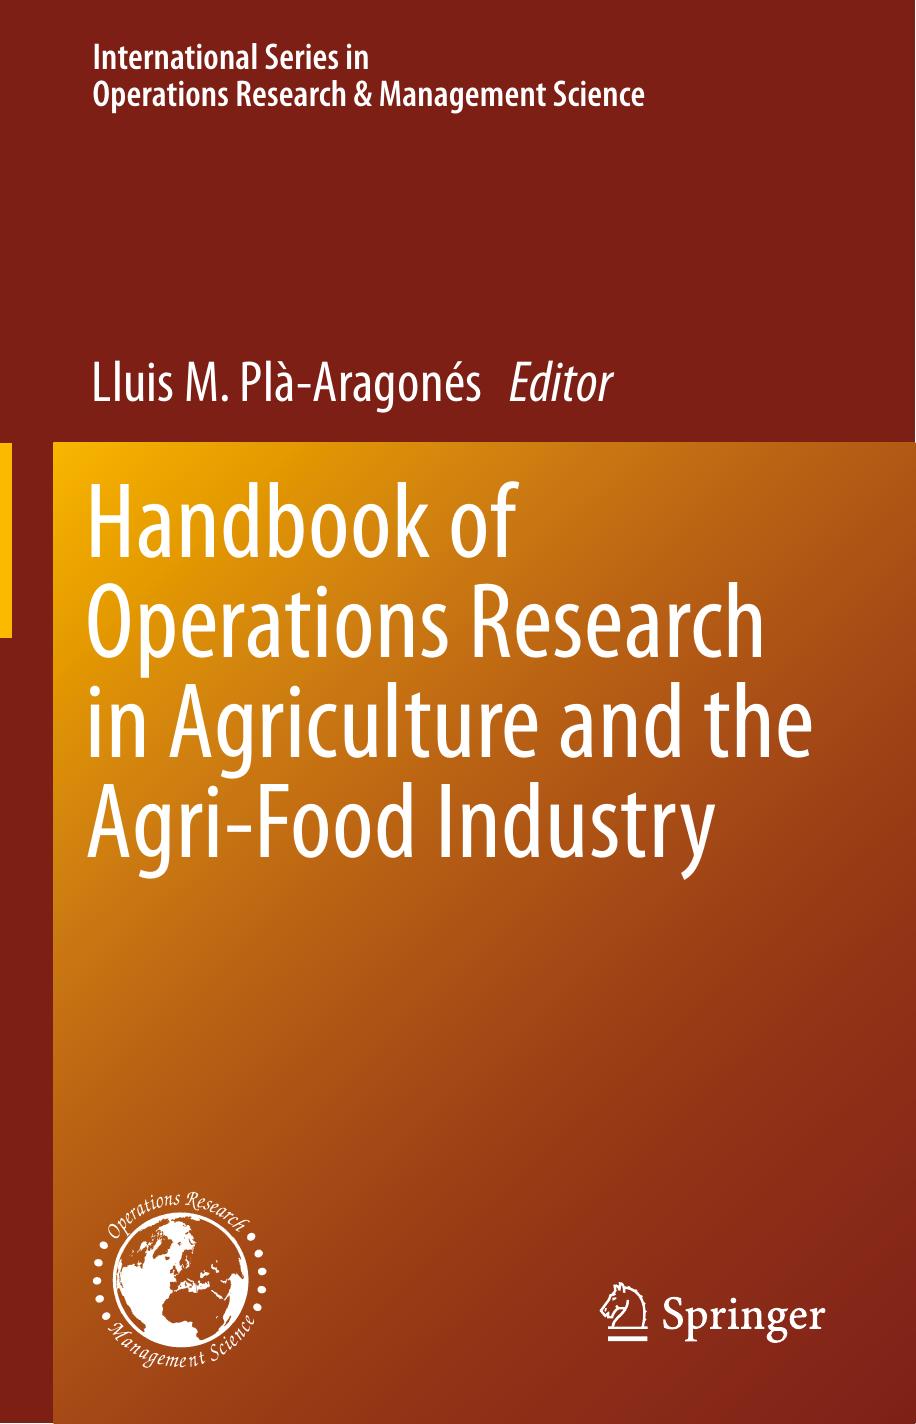 Handbook of Operations Research in Agriculture and the Agri-Food Industry